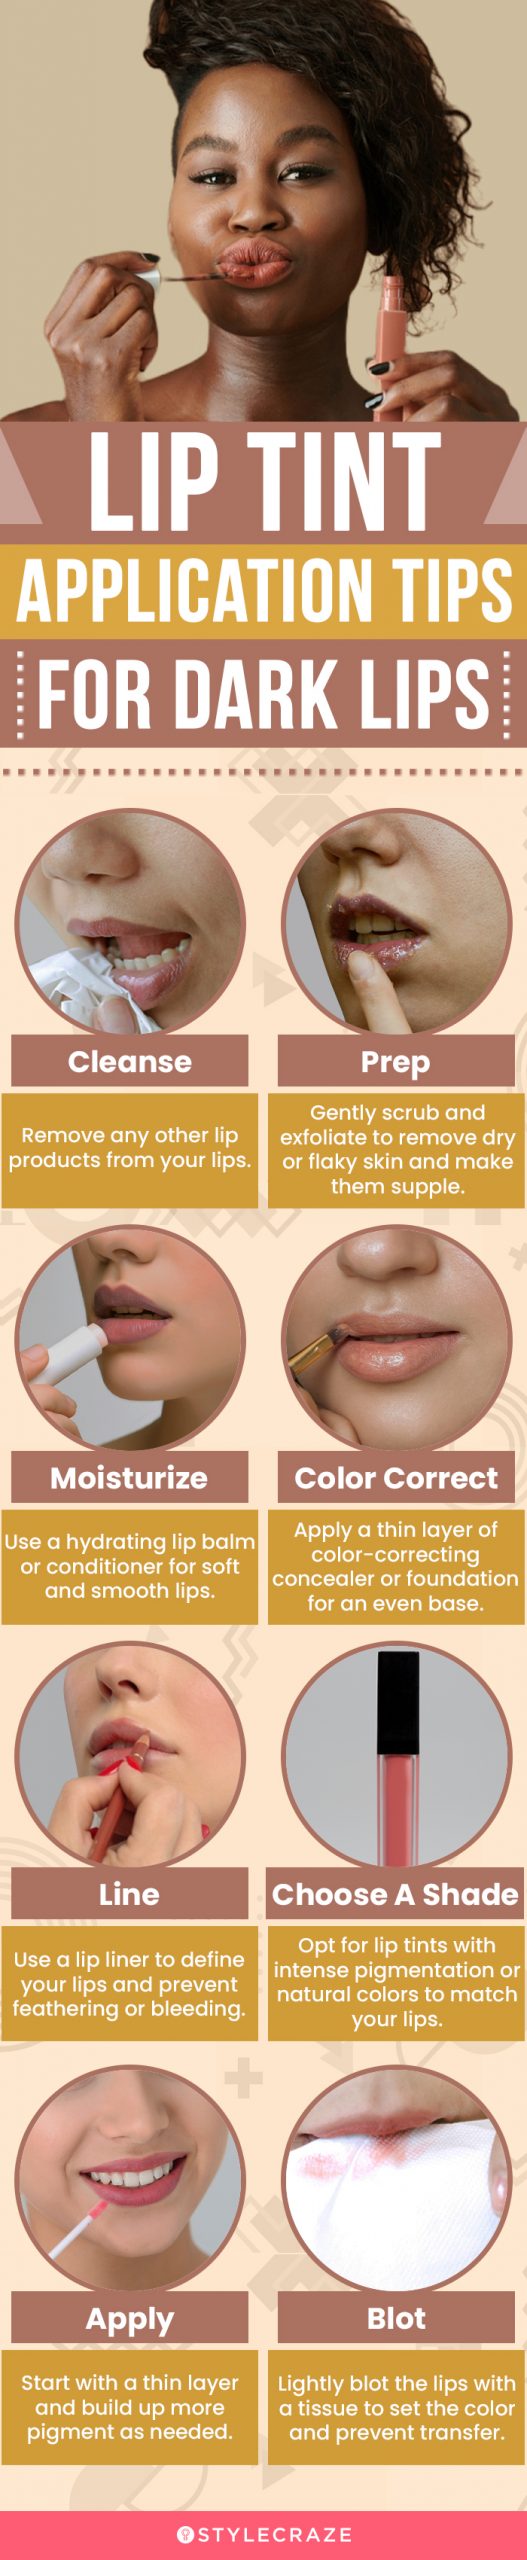 Lip Tints Application Tips For Dark Lips (infographic)